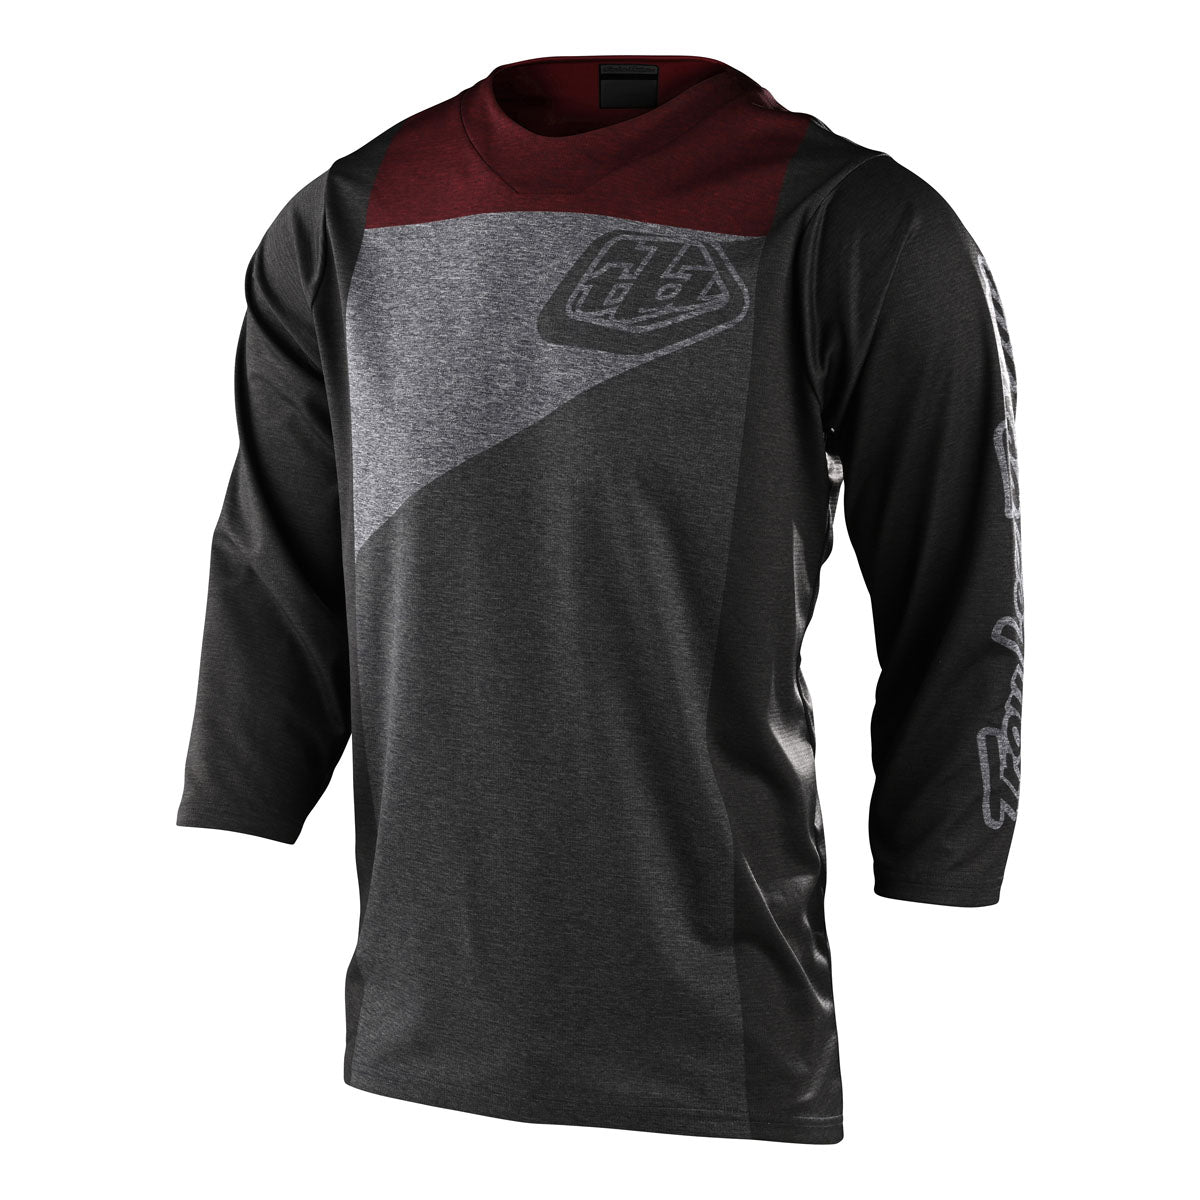 Troy Lee Designs Ruckus Jersey (CLOSEOUT) - Tres Heather Gray/Brick